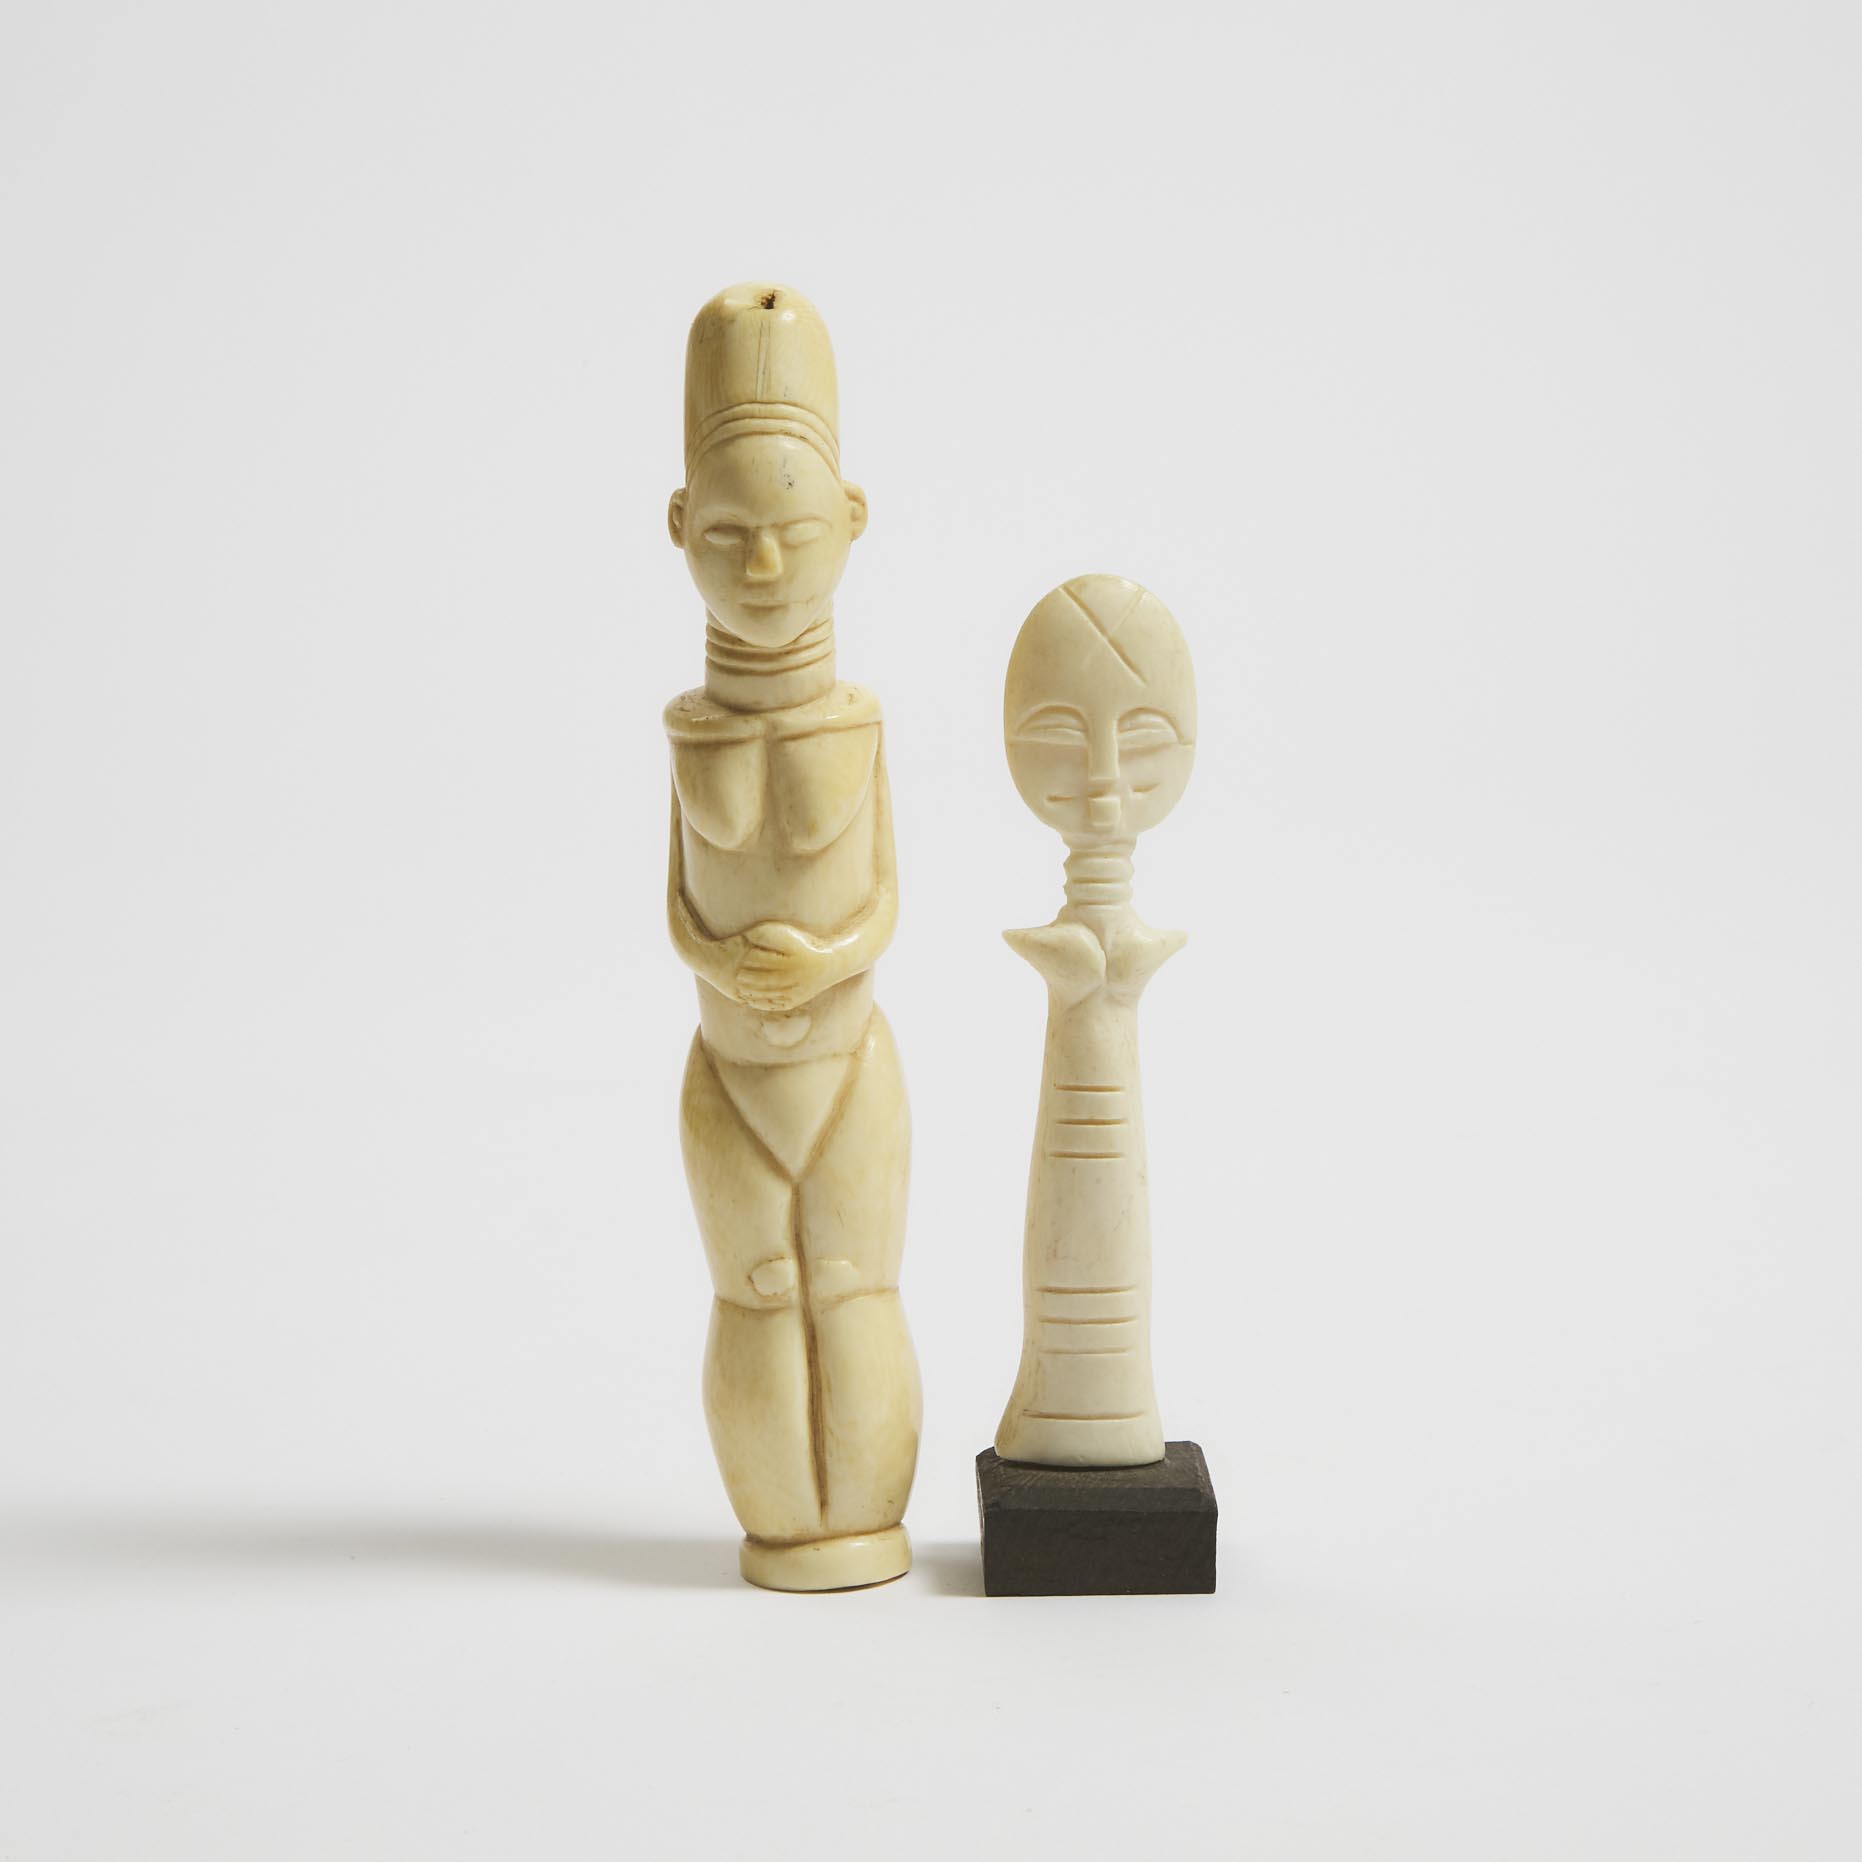 Mangbetu Carved Ivory Female Figure, Democratic Republic of Congo, Central Africa, late 19th to early 20th century together with a small Ashanti Akuaba (Fertility) Ivory Figure, Ghana, West Africa, mid 20th century